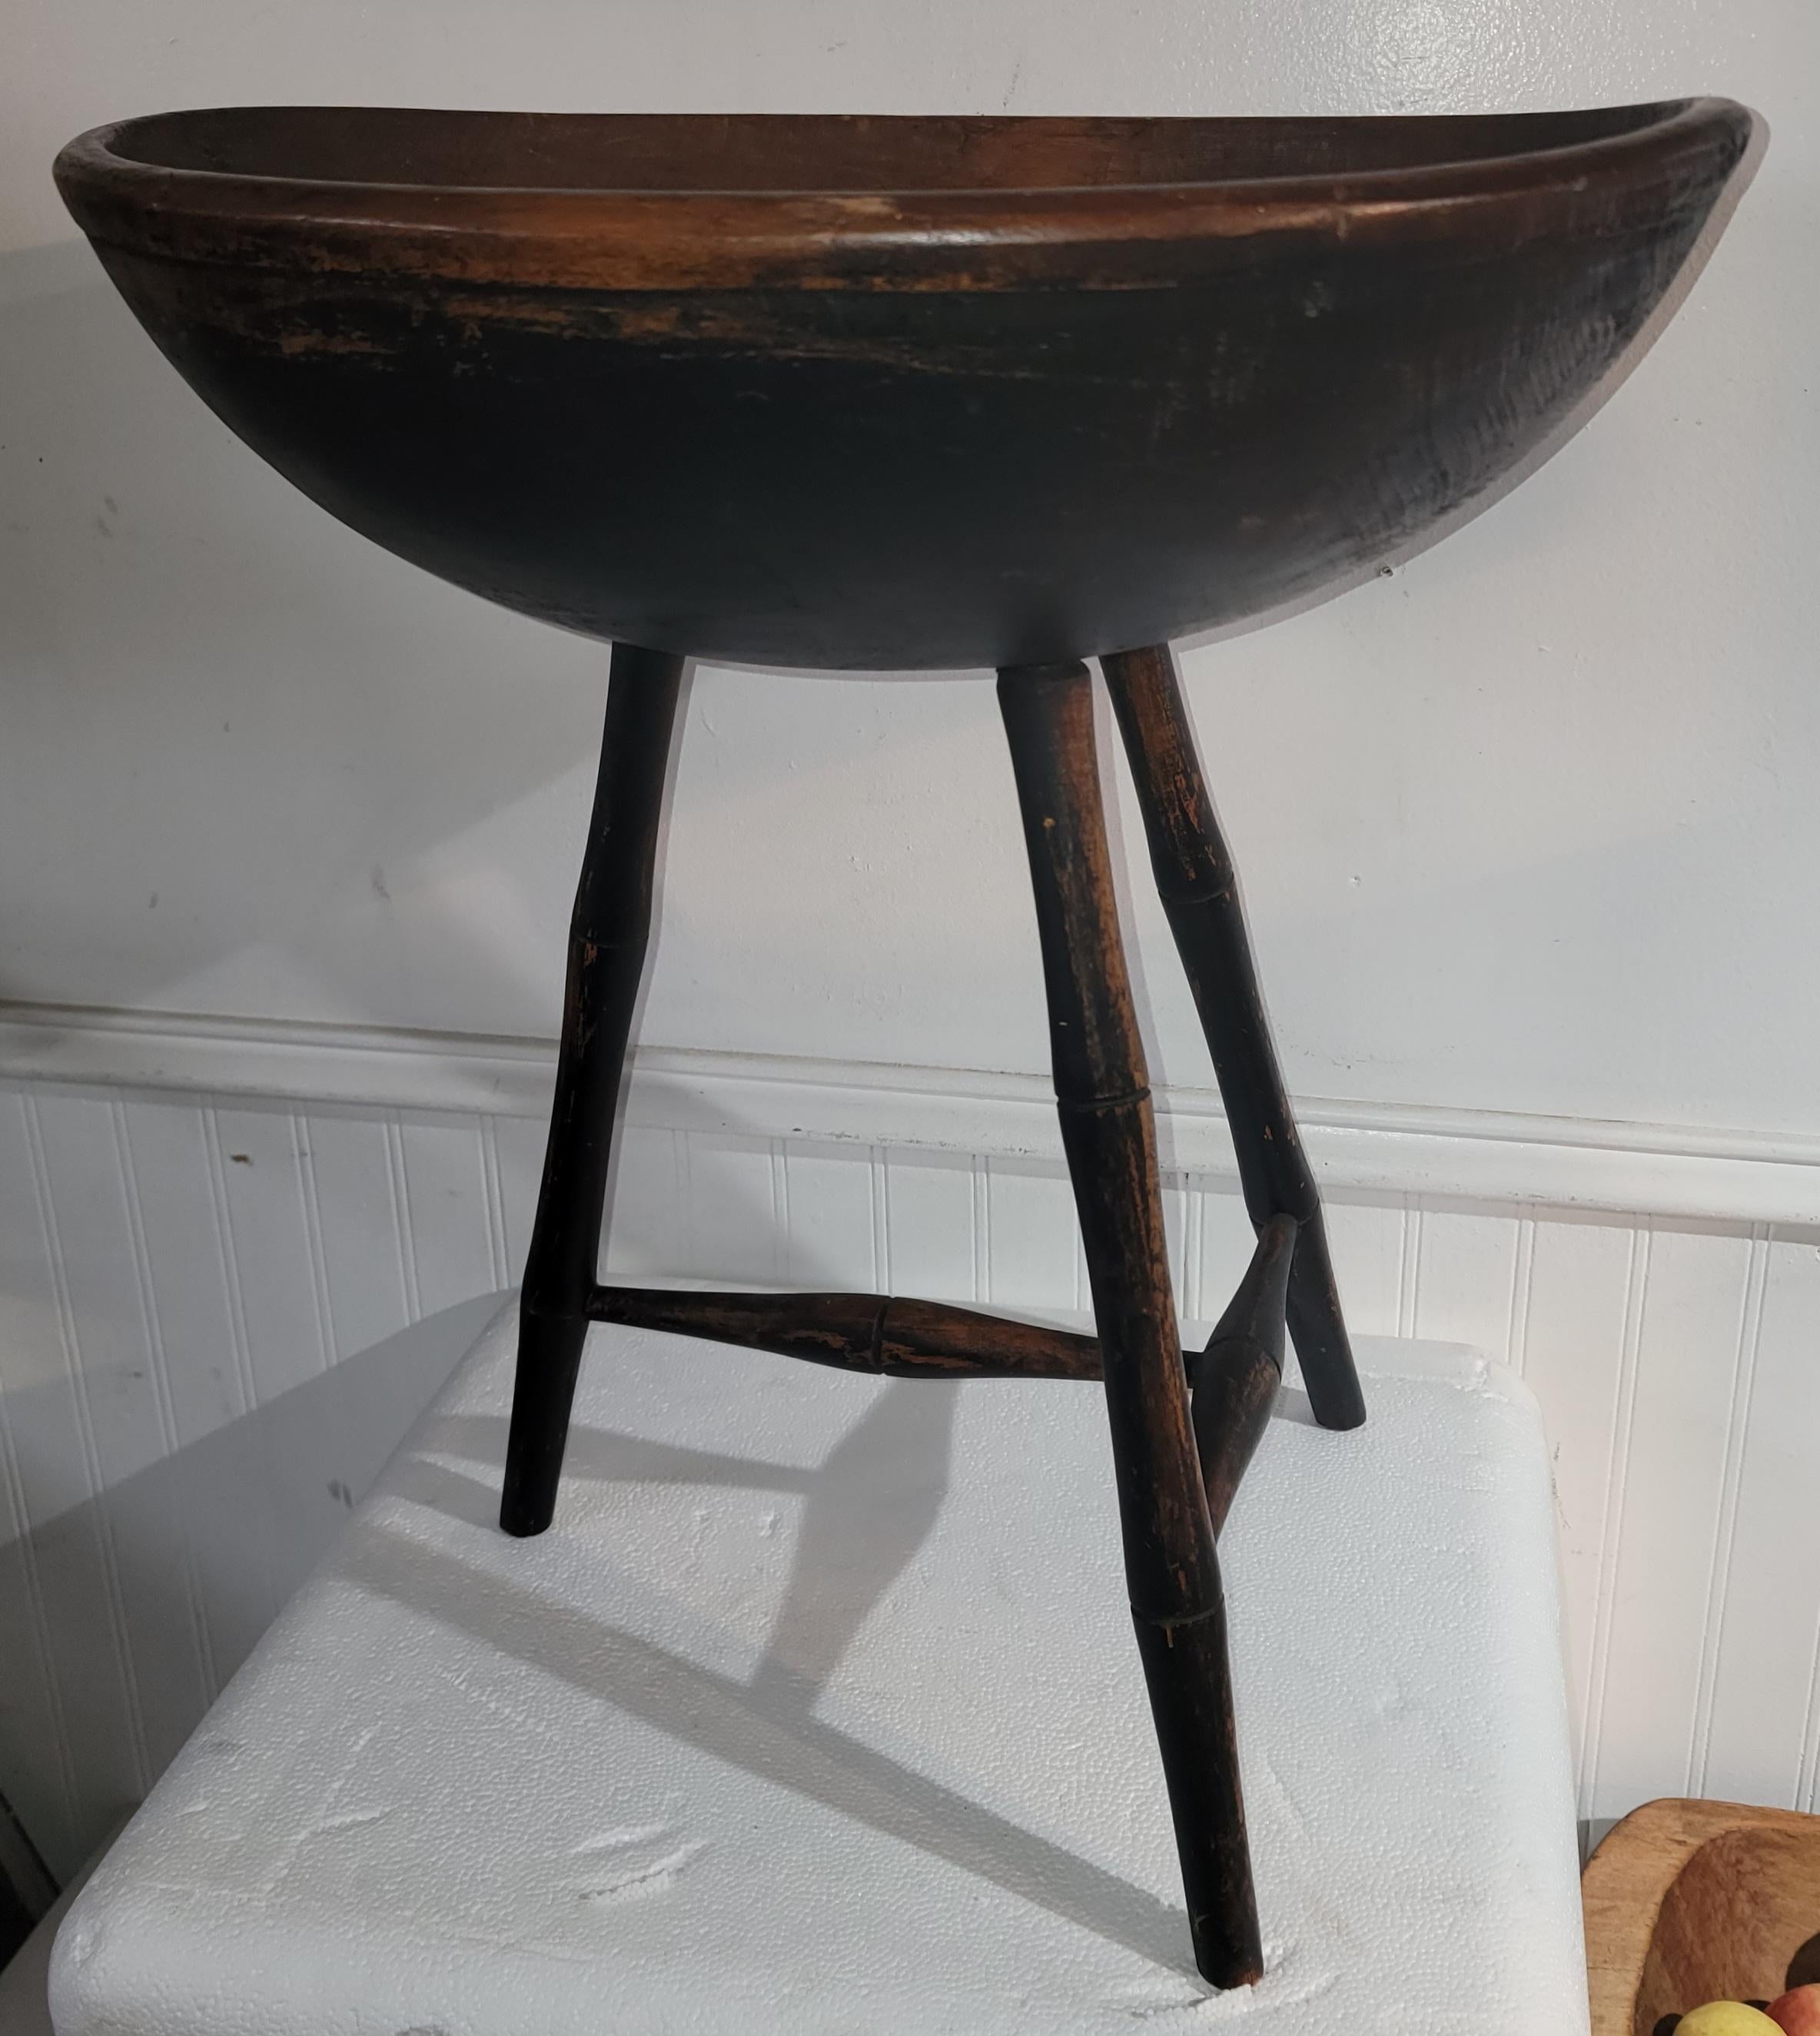 19th Century Original black painted butter bowl on legs. Fantastic surface with bamboo turnings in fine condition.